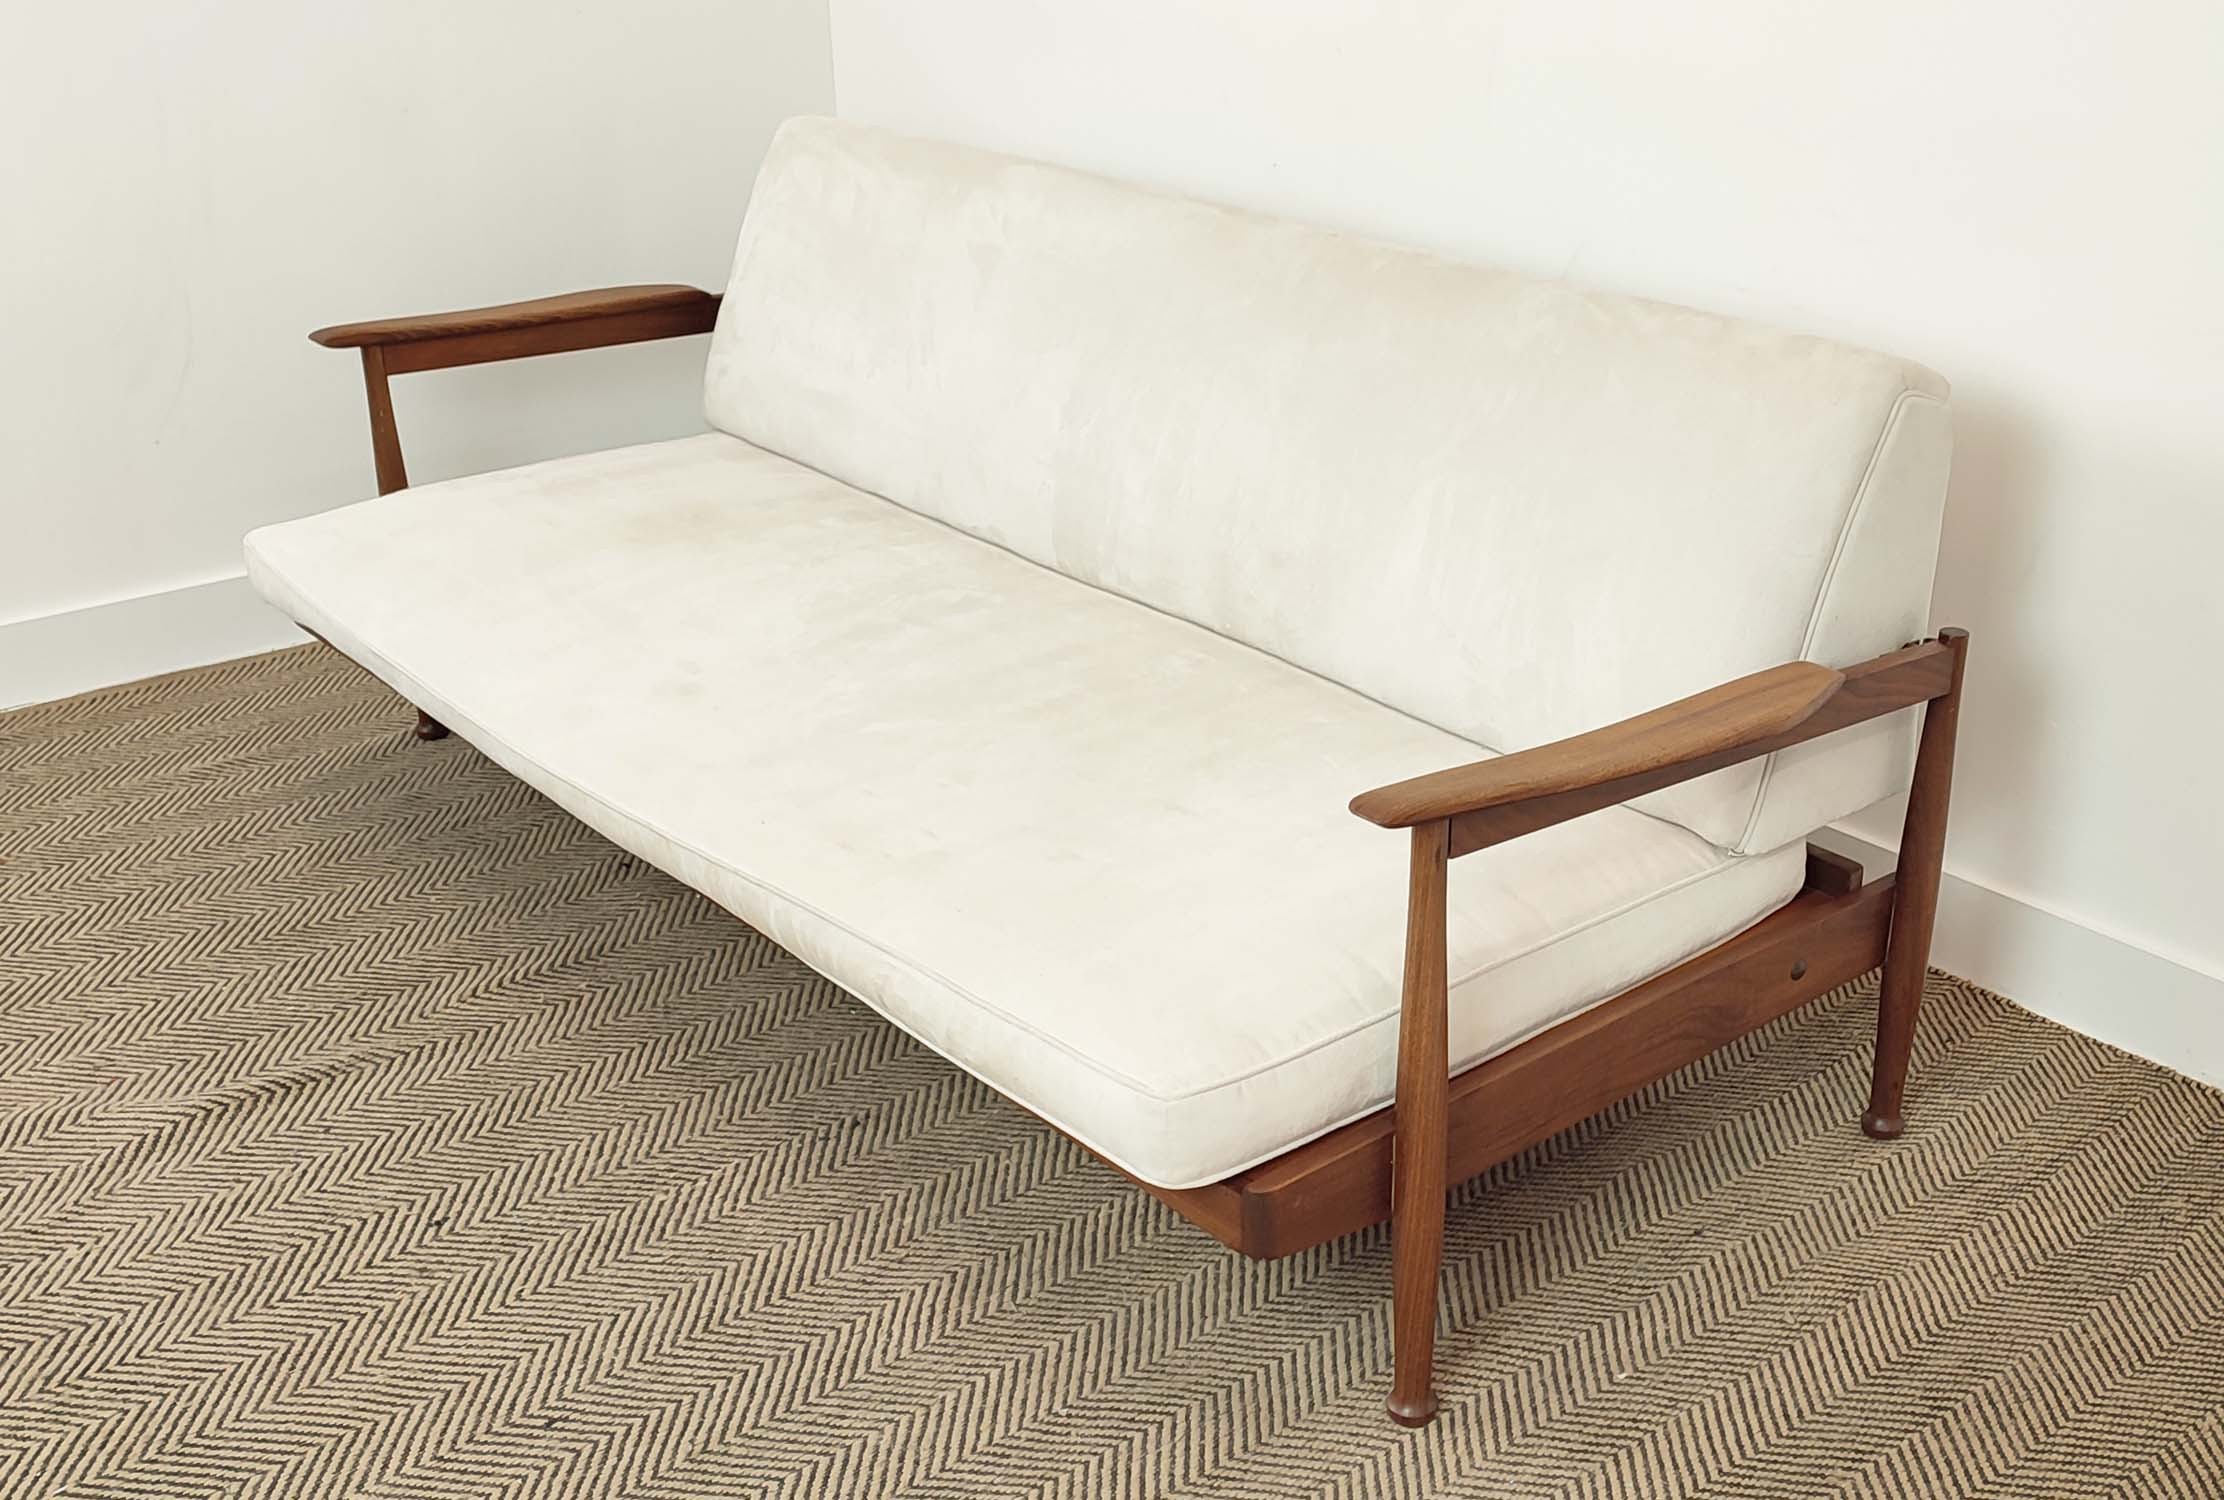 SOFA, vintage 20th century with a tilting back exposing hidden storage, 205cm W x 81cm D. - Image 3 of 9